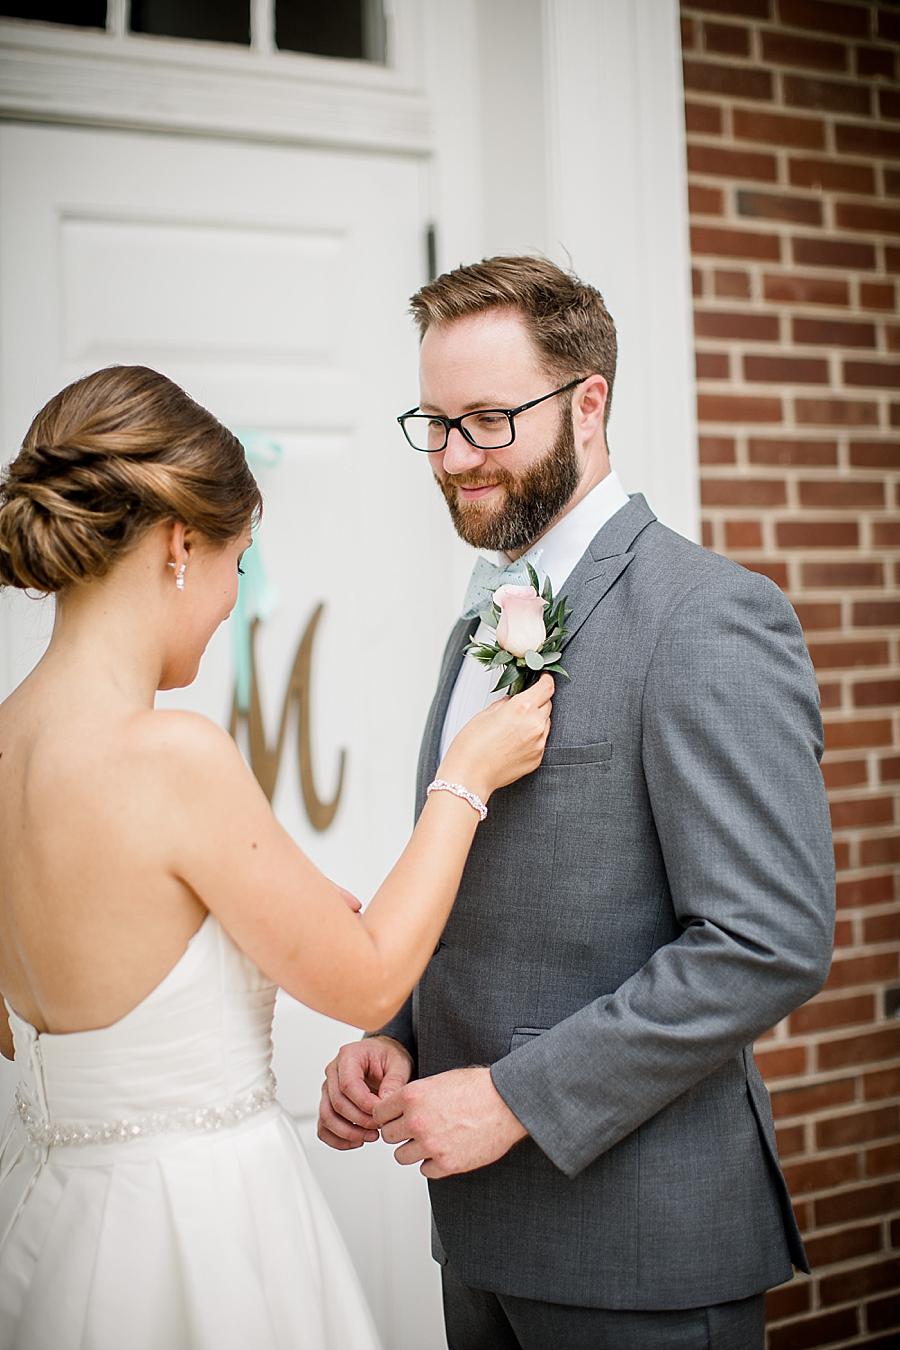 The first look at this Fountain City Church Wedding by Knoxville Wedding Photographer, Amanda May Photos.